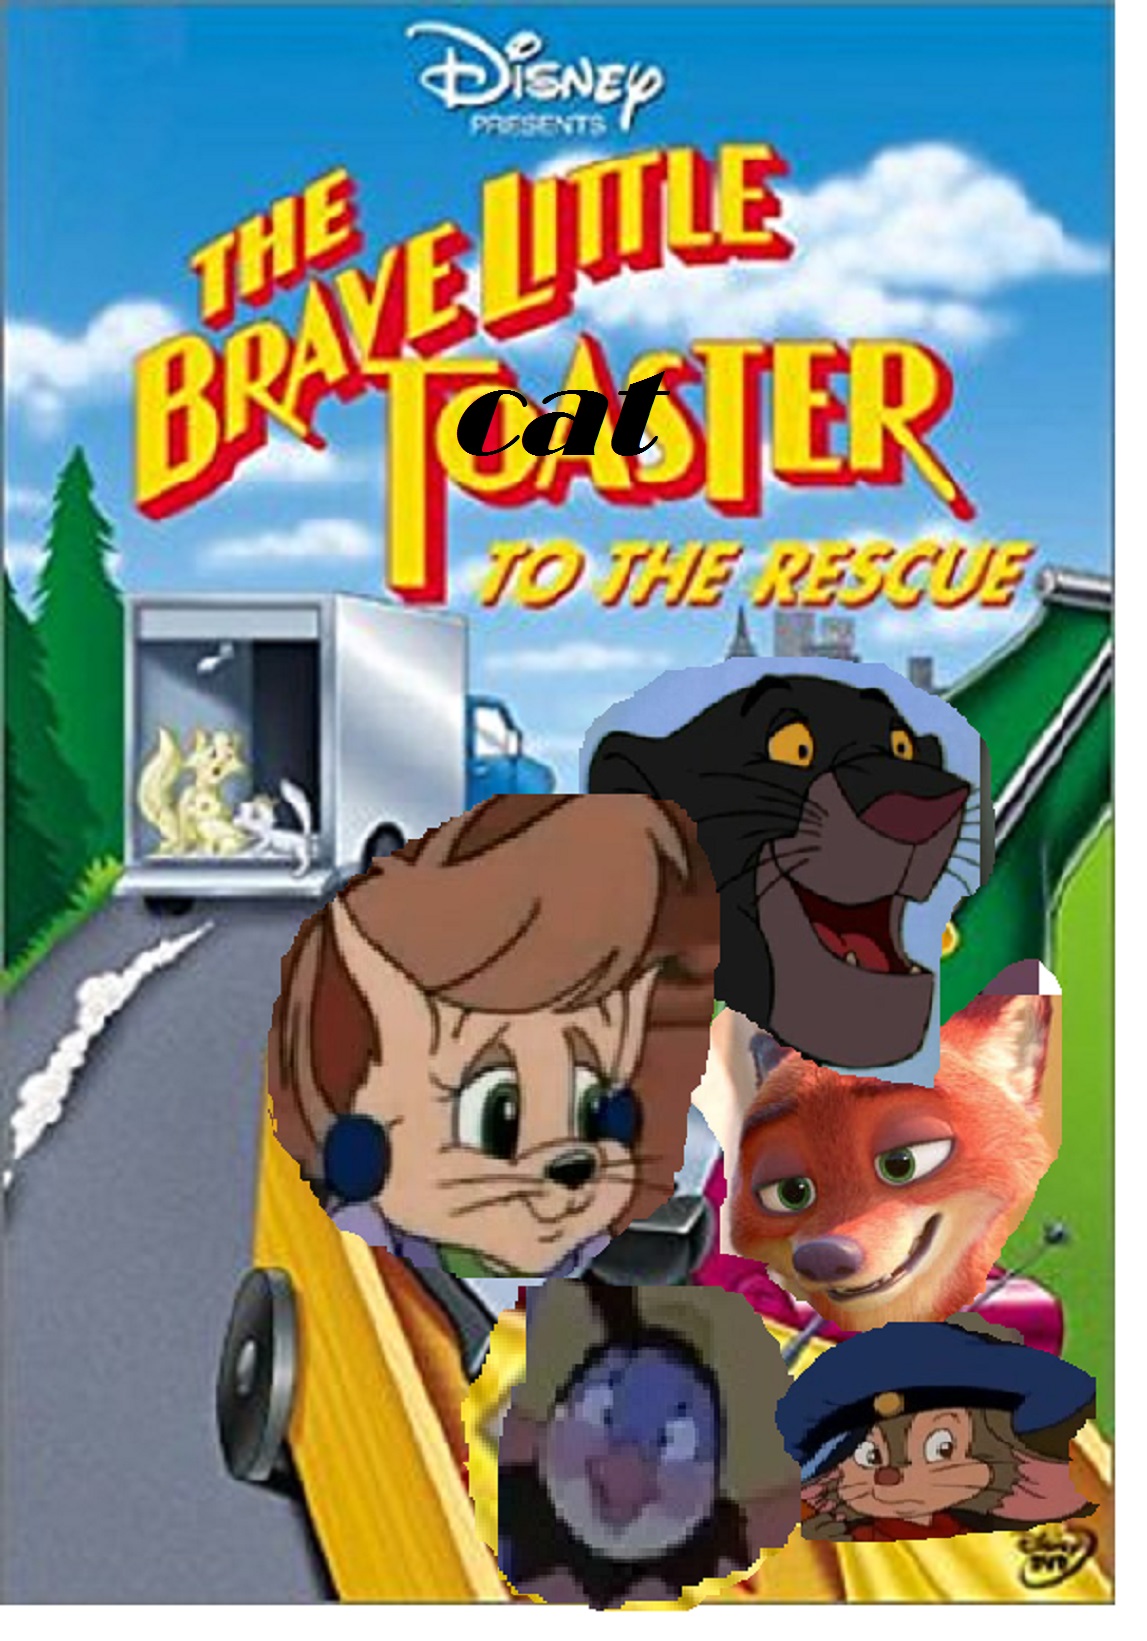 the brave little toaster to the rescue cast